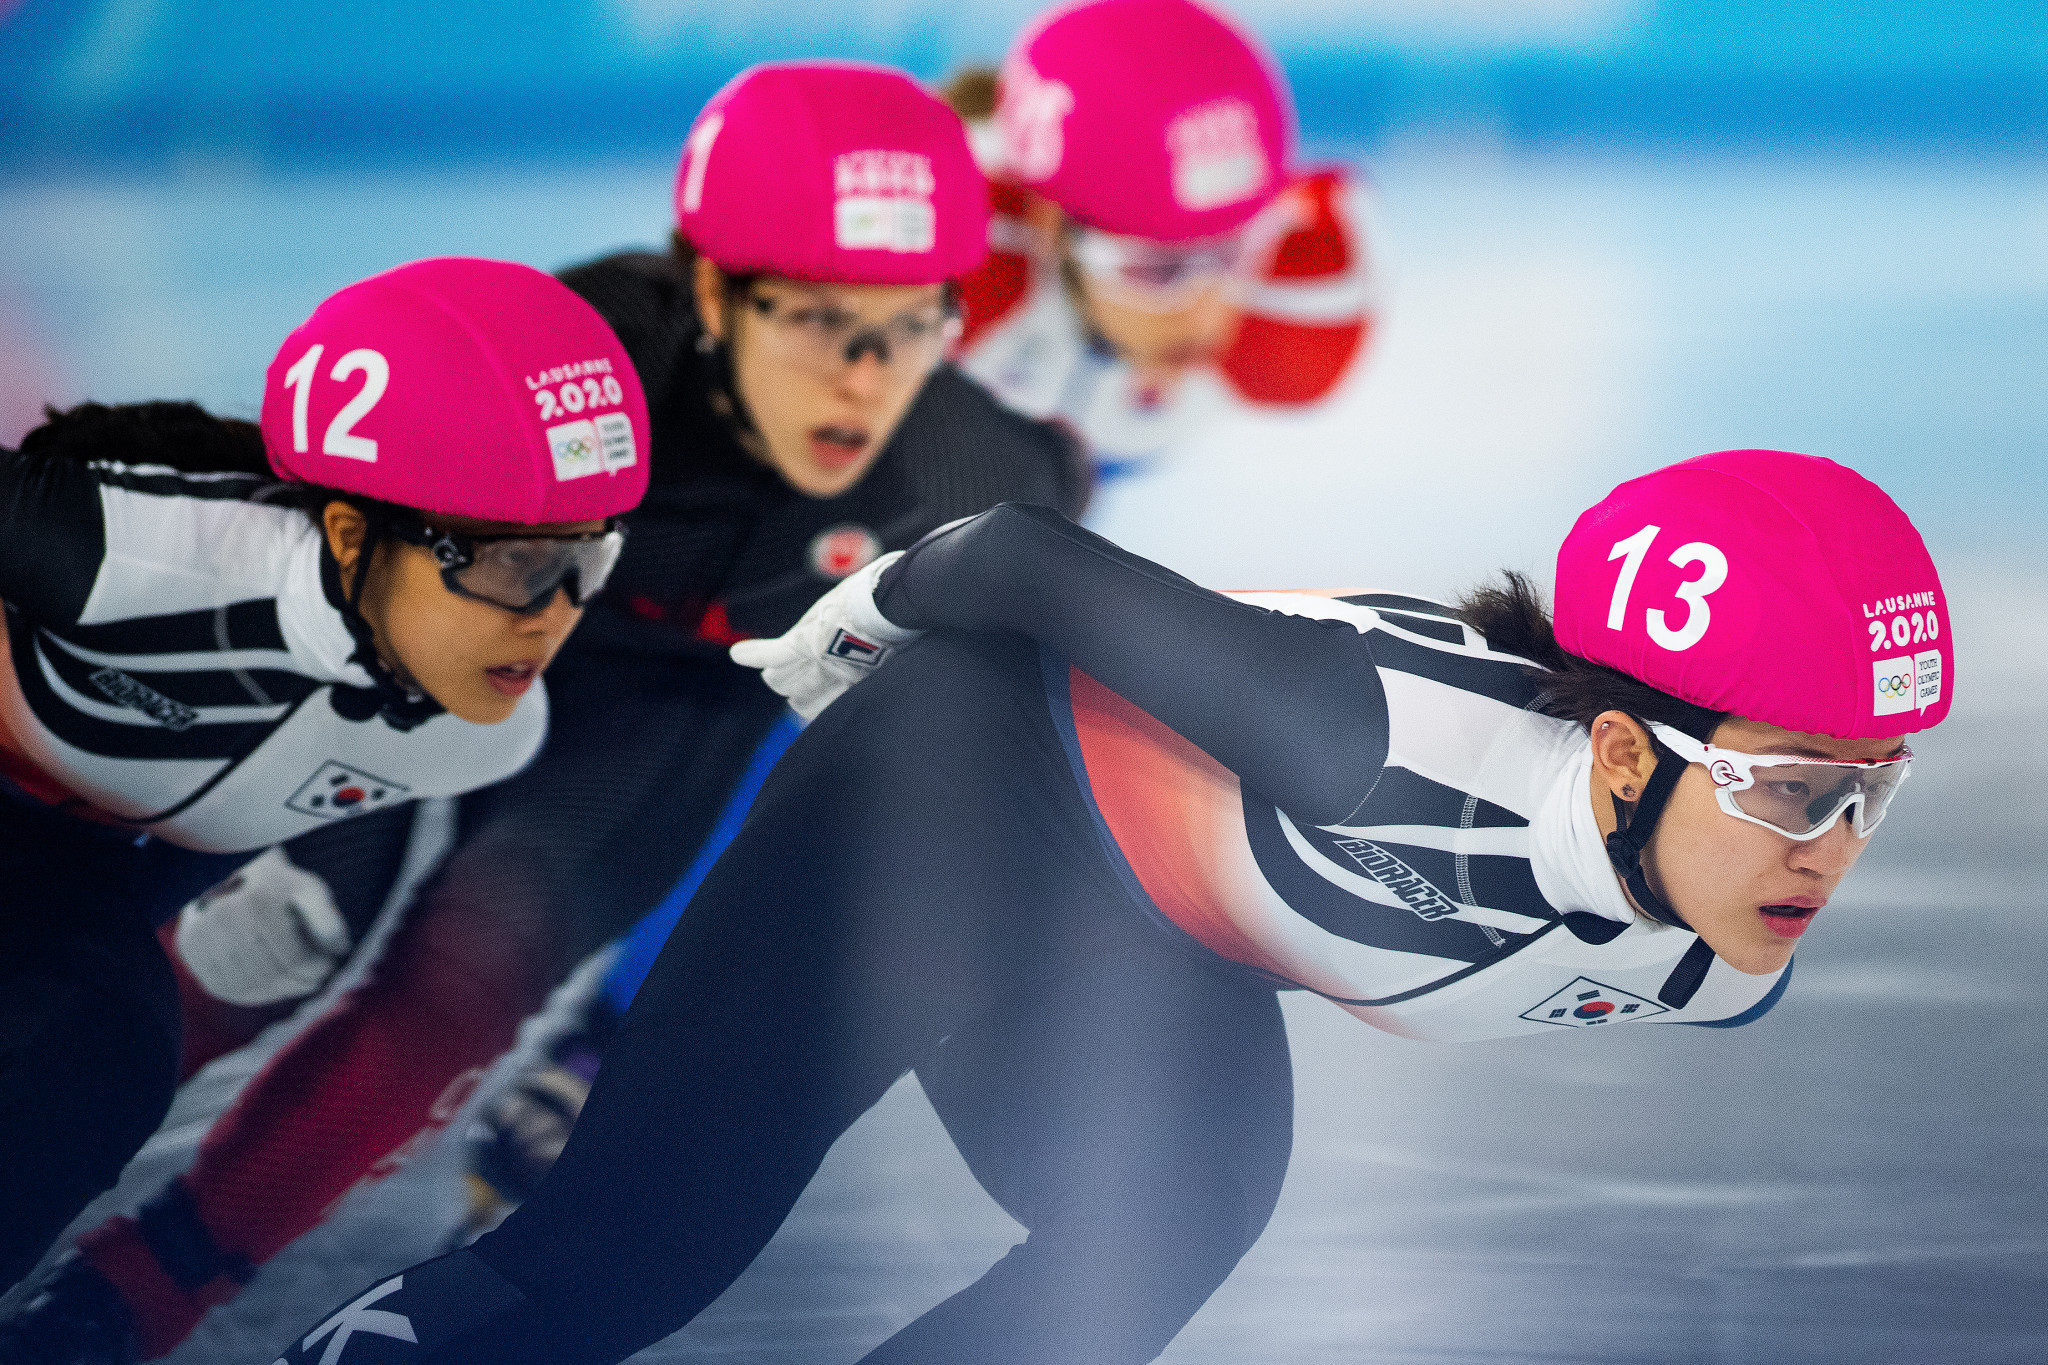 South Korea swept both short track titles on offer as the sport made an impressive entrance at Lausanne 2020 ©Getty Images